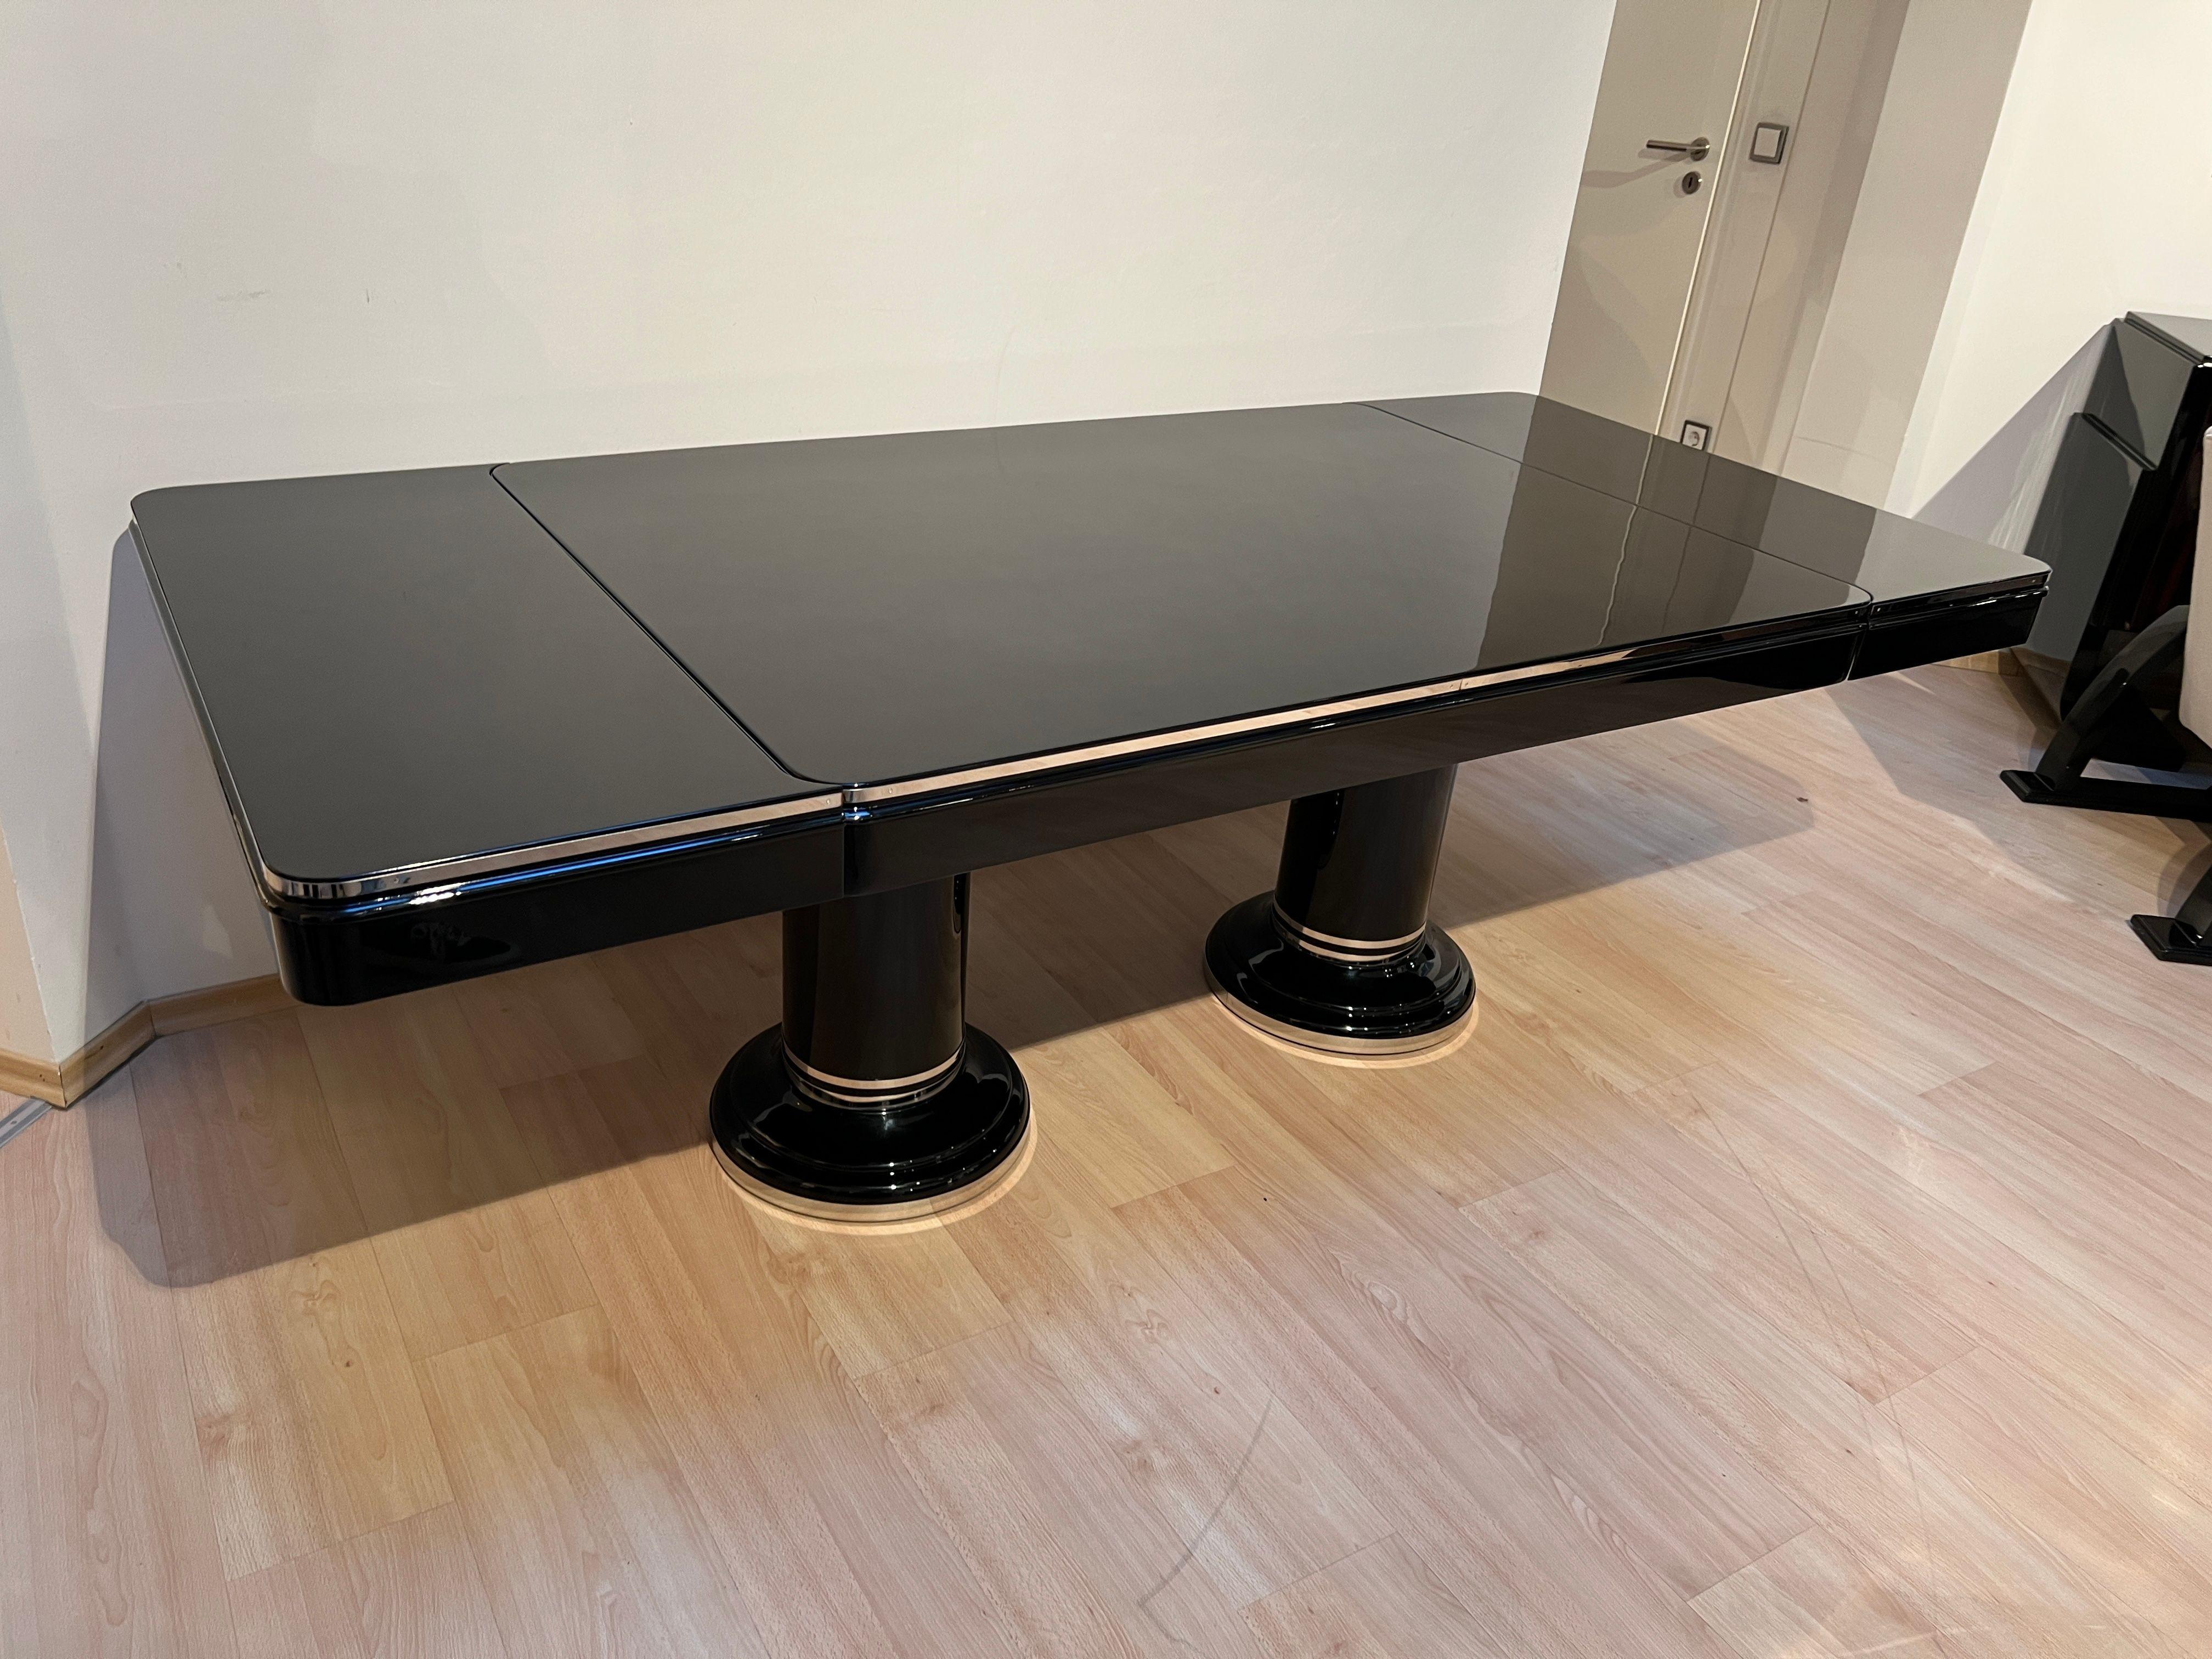 French Art Deco Expandable Table, Black Lacquer, Stainless Steel, France circa 1930